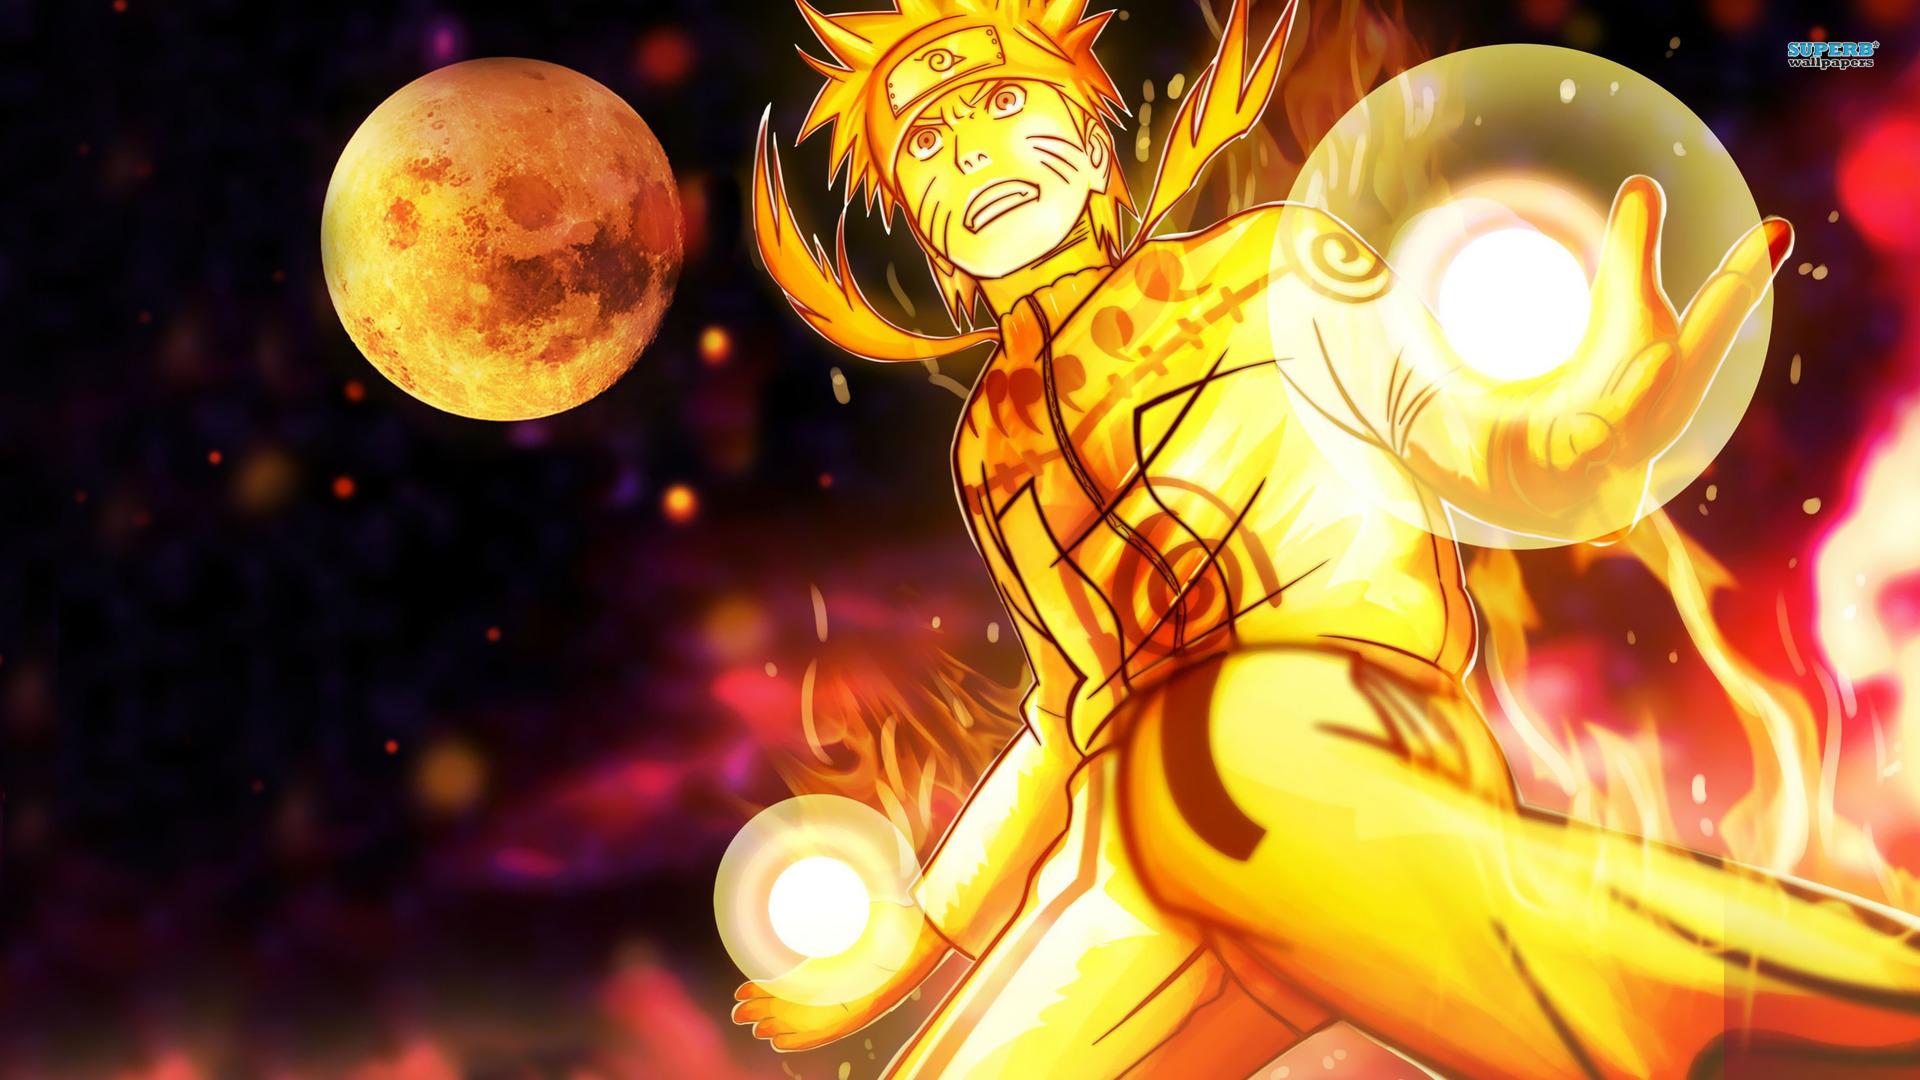 Naruto Hd Wallpapers | HD Wallpapers Online